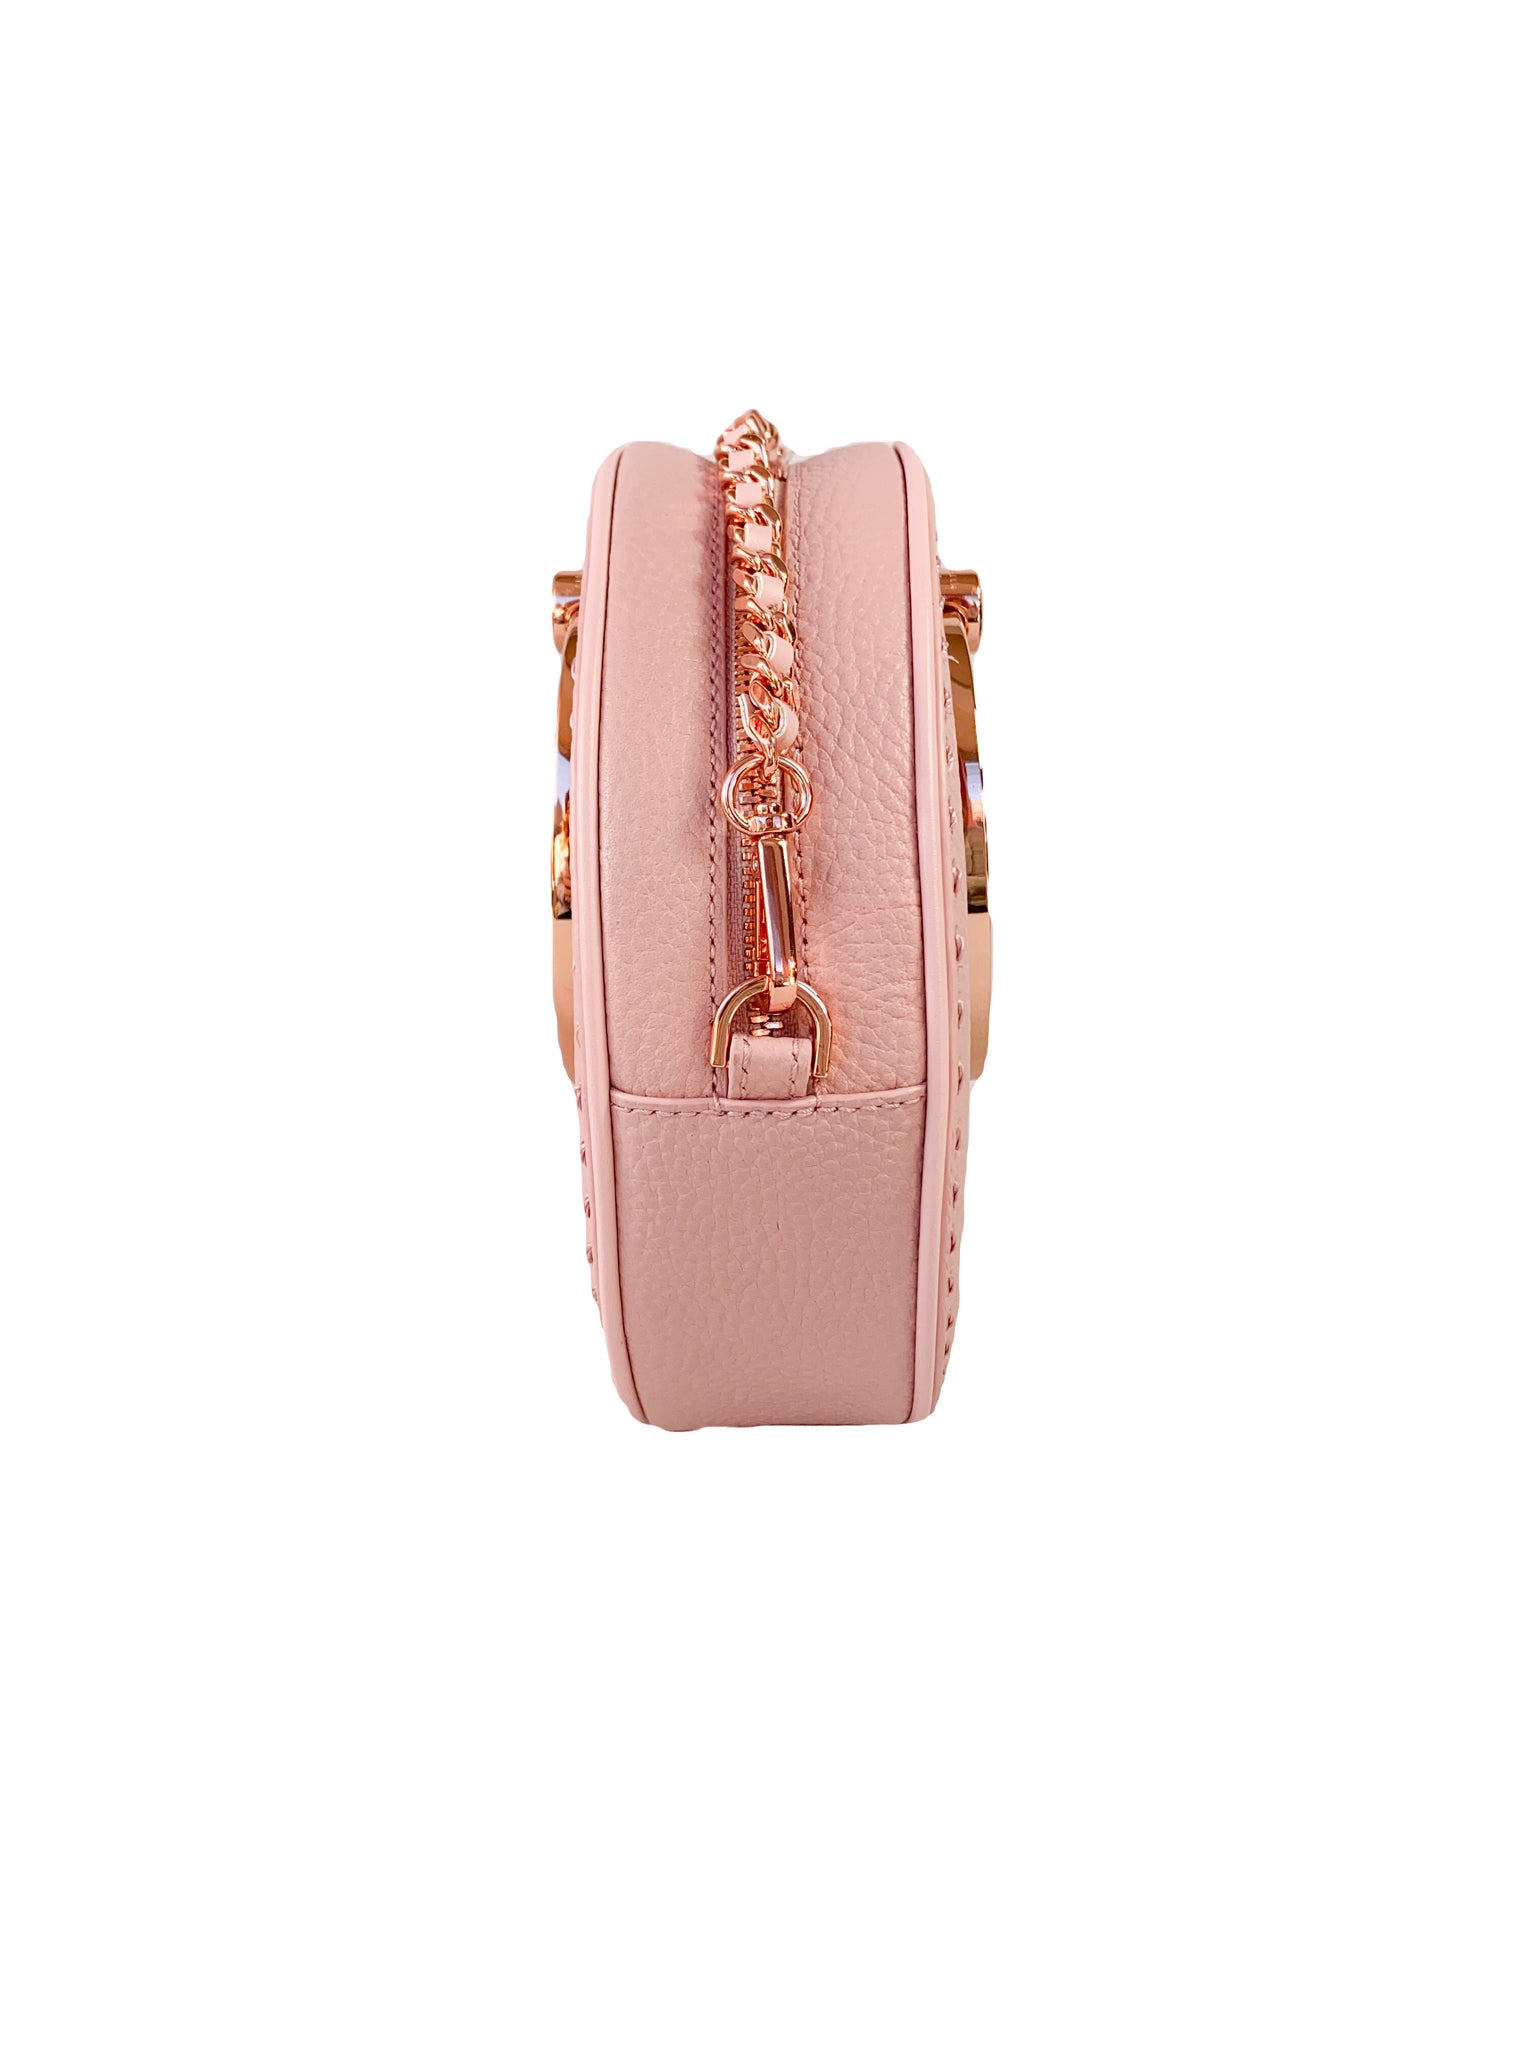 ROSYELA - PL-PINK | Accessories | Ted Baker ROW